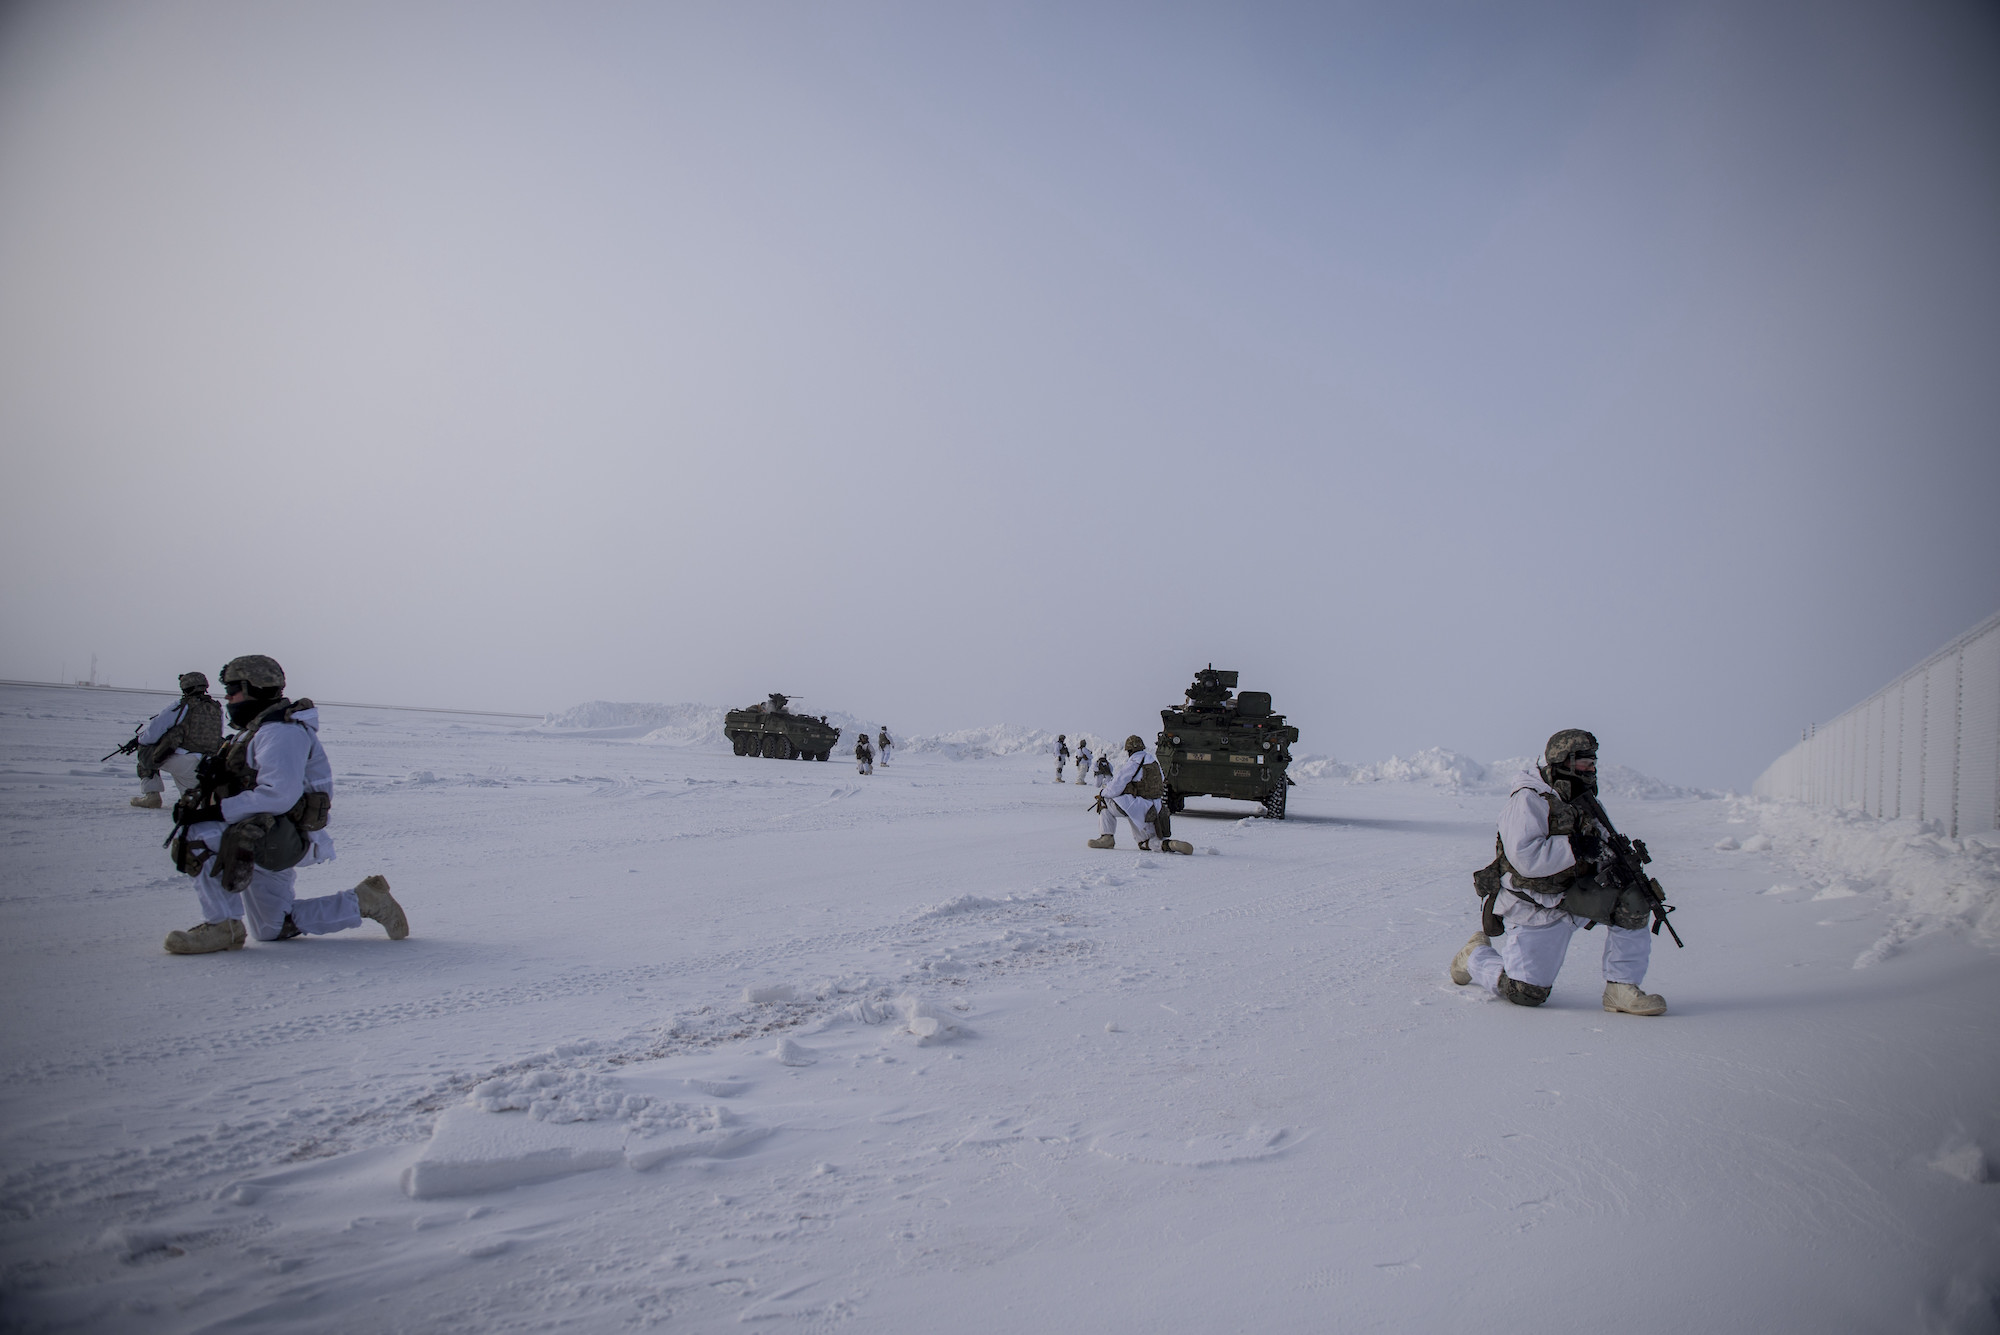 US Soldiers assigned to 3rd Battalion, 21st Infantry Regiment provide overwatch during an arctic deployment of Stryker armored vehicles as part of the US Army Alaska led exercise Arctic Edge 18 at Eleison Air Force Base, Alaska, March 13, 2018.